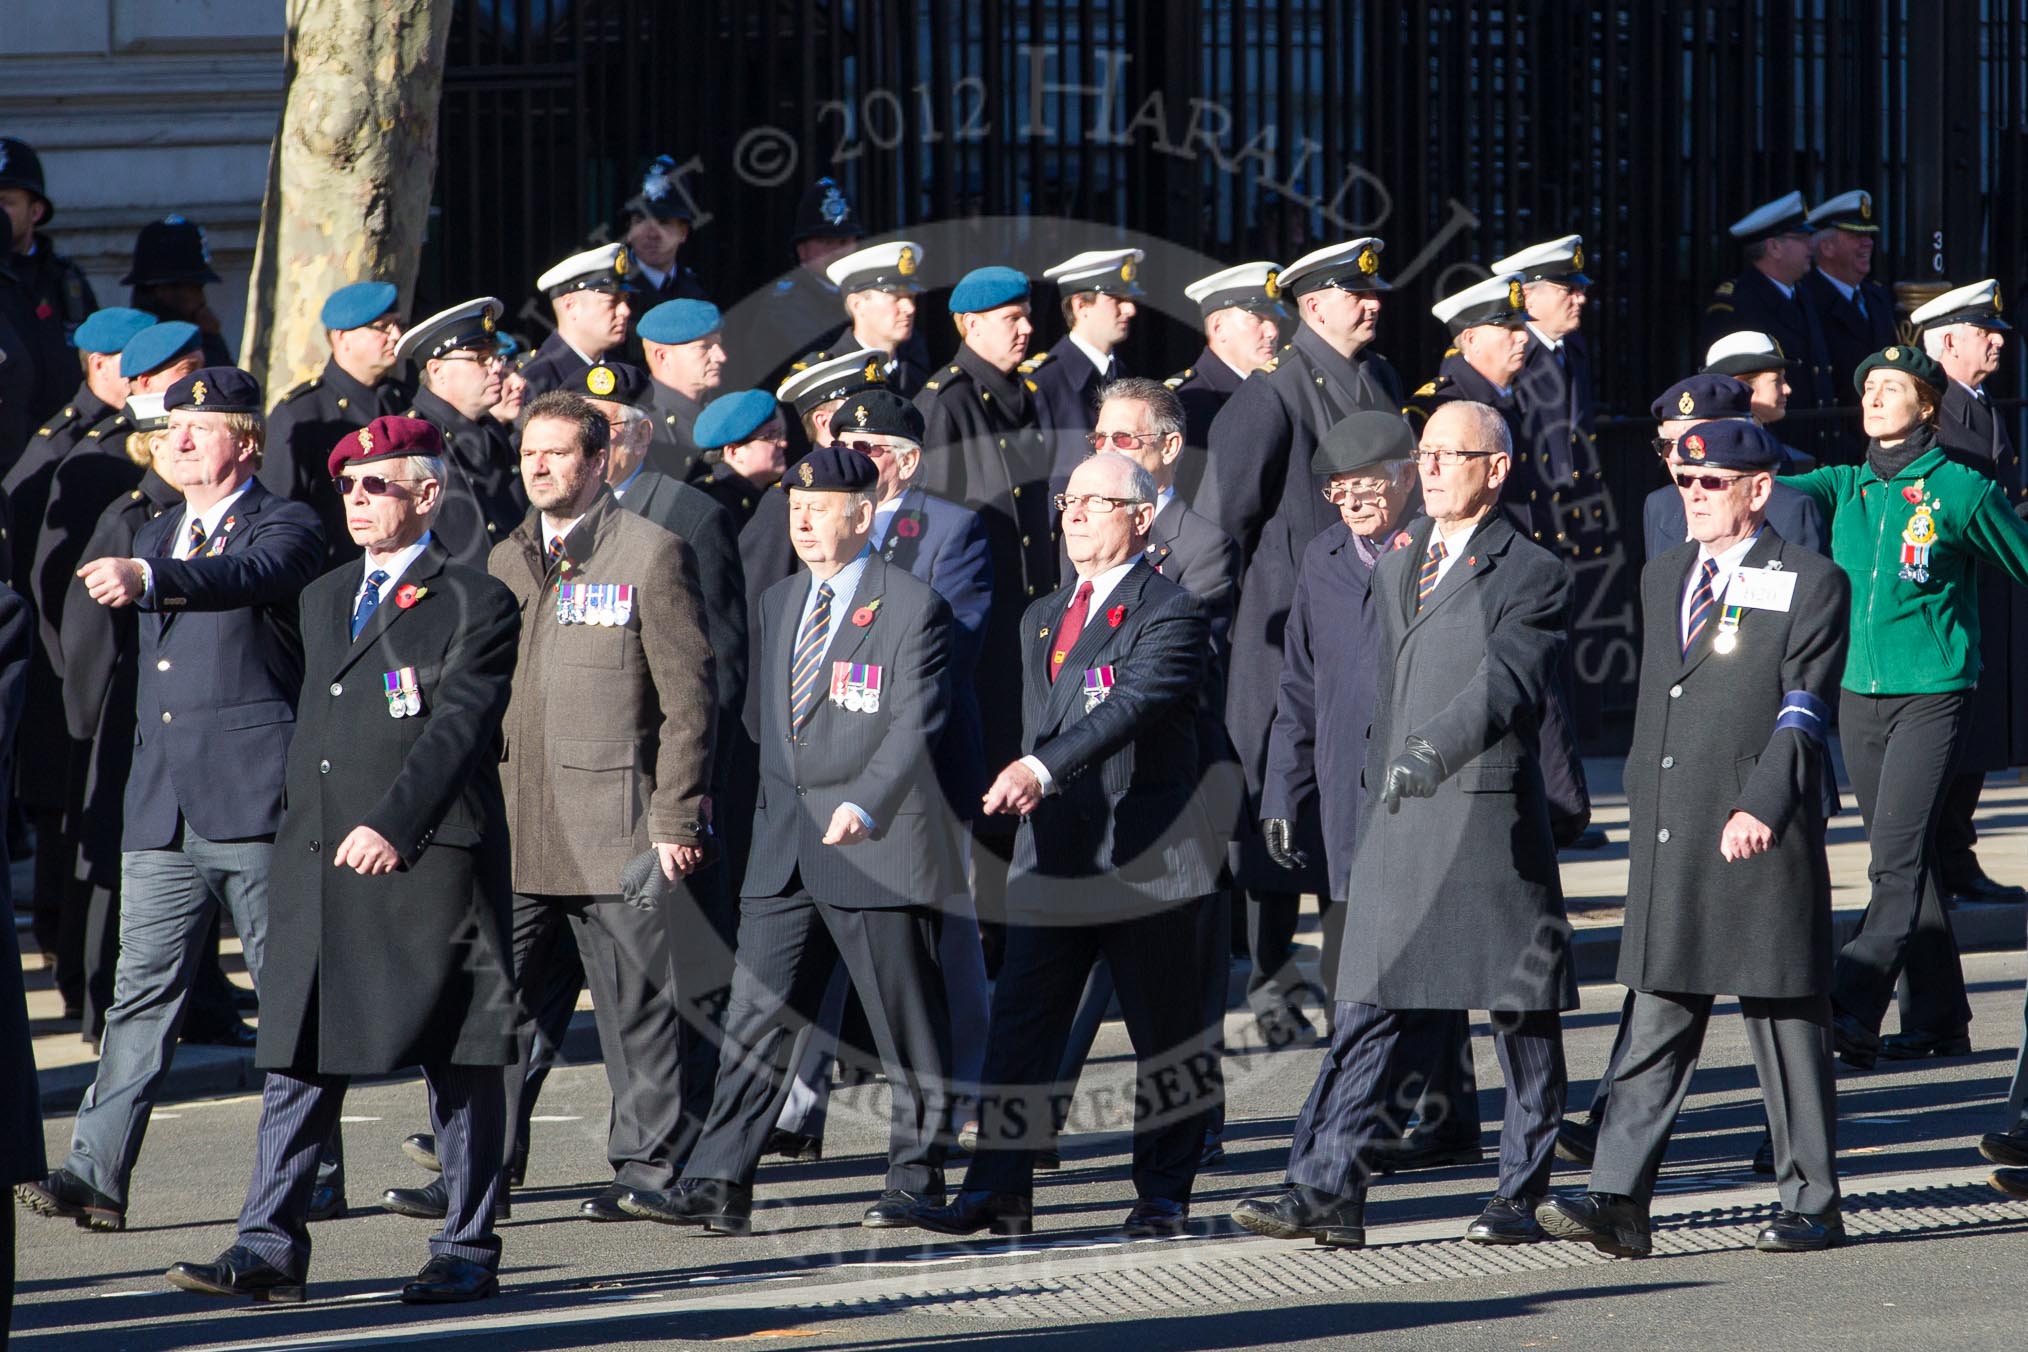 Remembrance Sunday 2012 Cenotaph March Past: Group B20 - Arborfield Old Boys Association..
Whitehall, Cenotaph,
London SW1,

United Kingdom,
on 11 November 2012 at 11:57, image #935